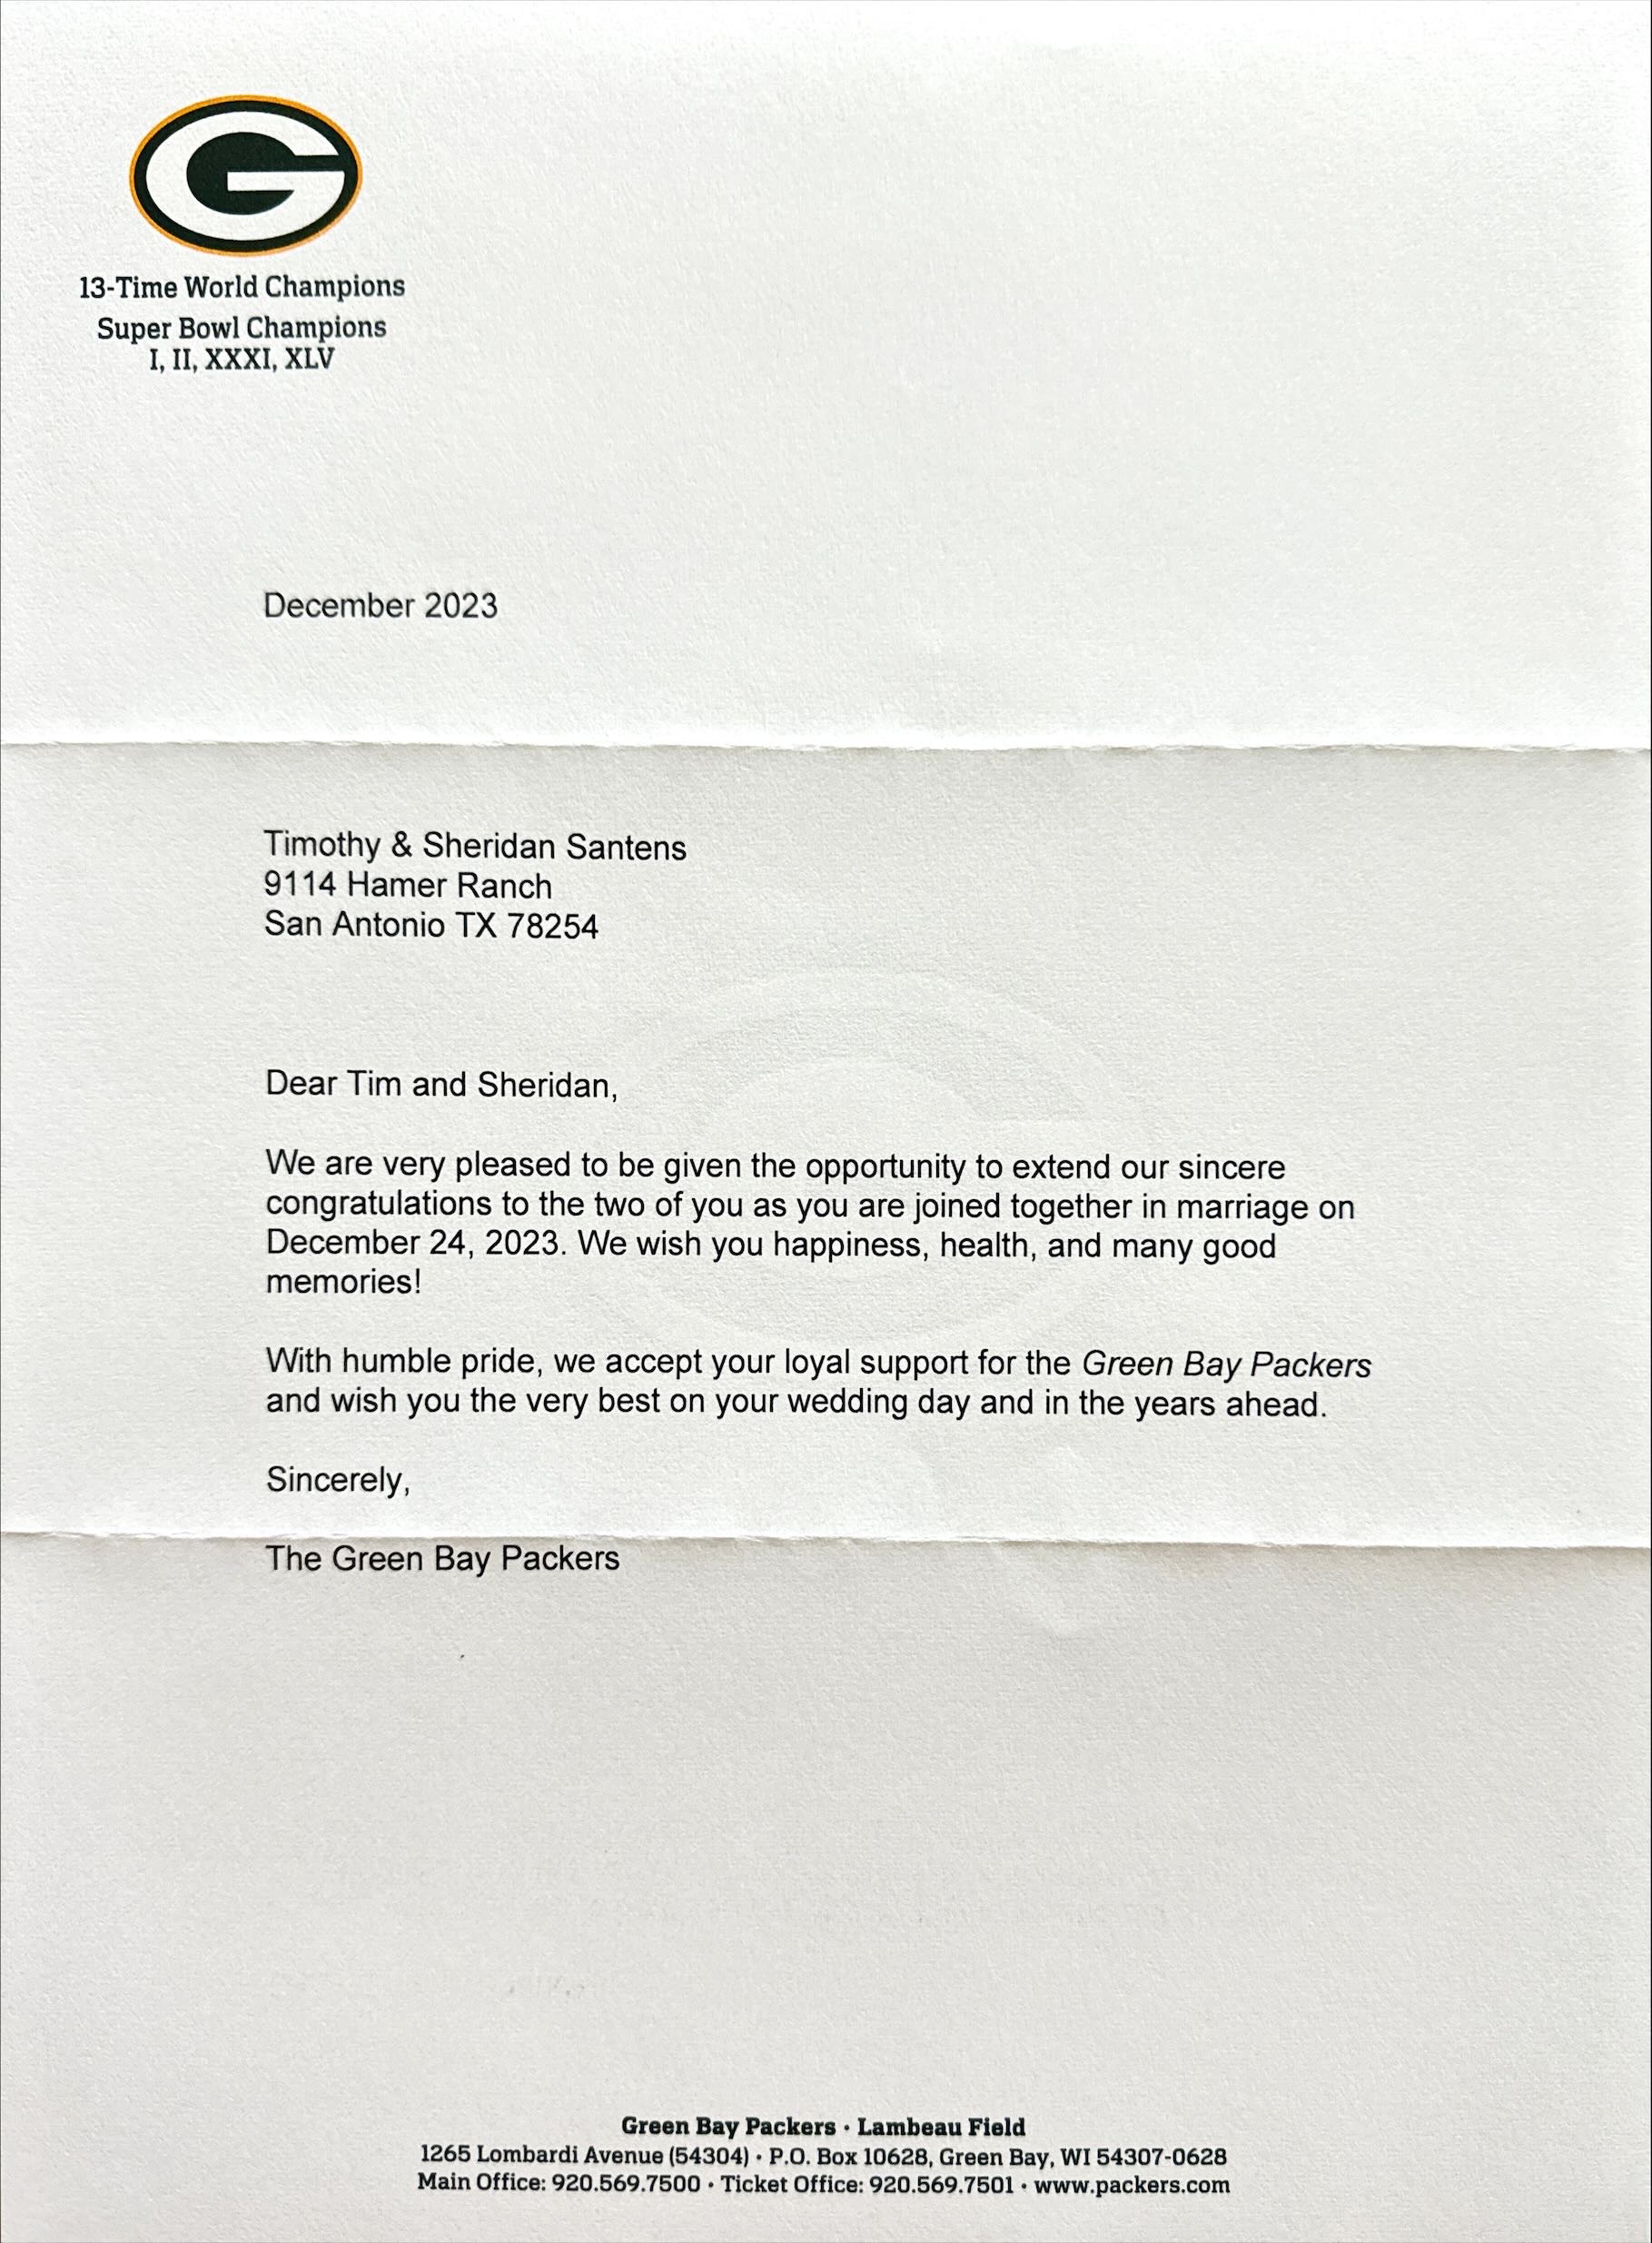 Green Bay Packers Letter